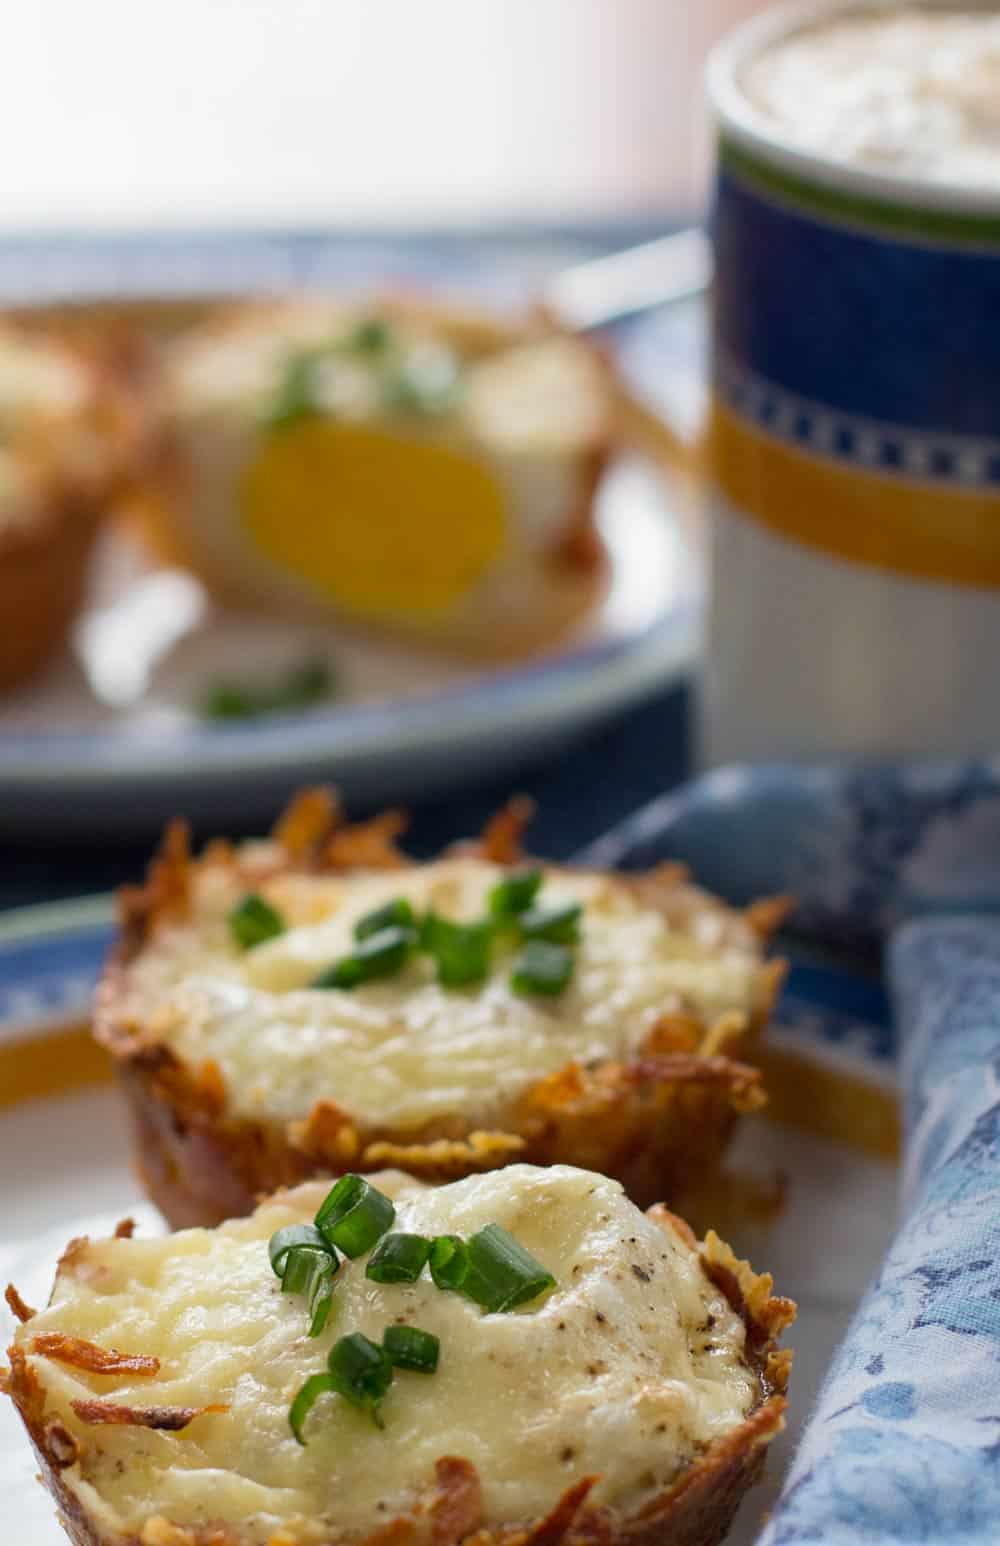 Cheesy hash brown egg nests with coffee cup